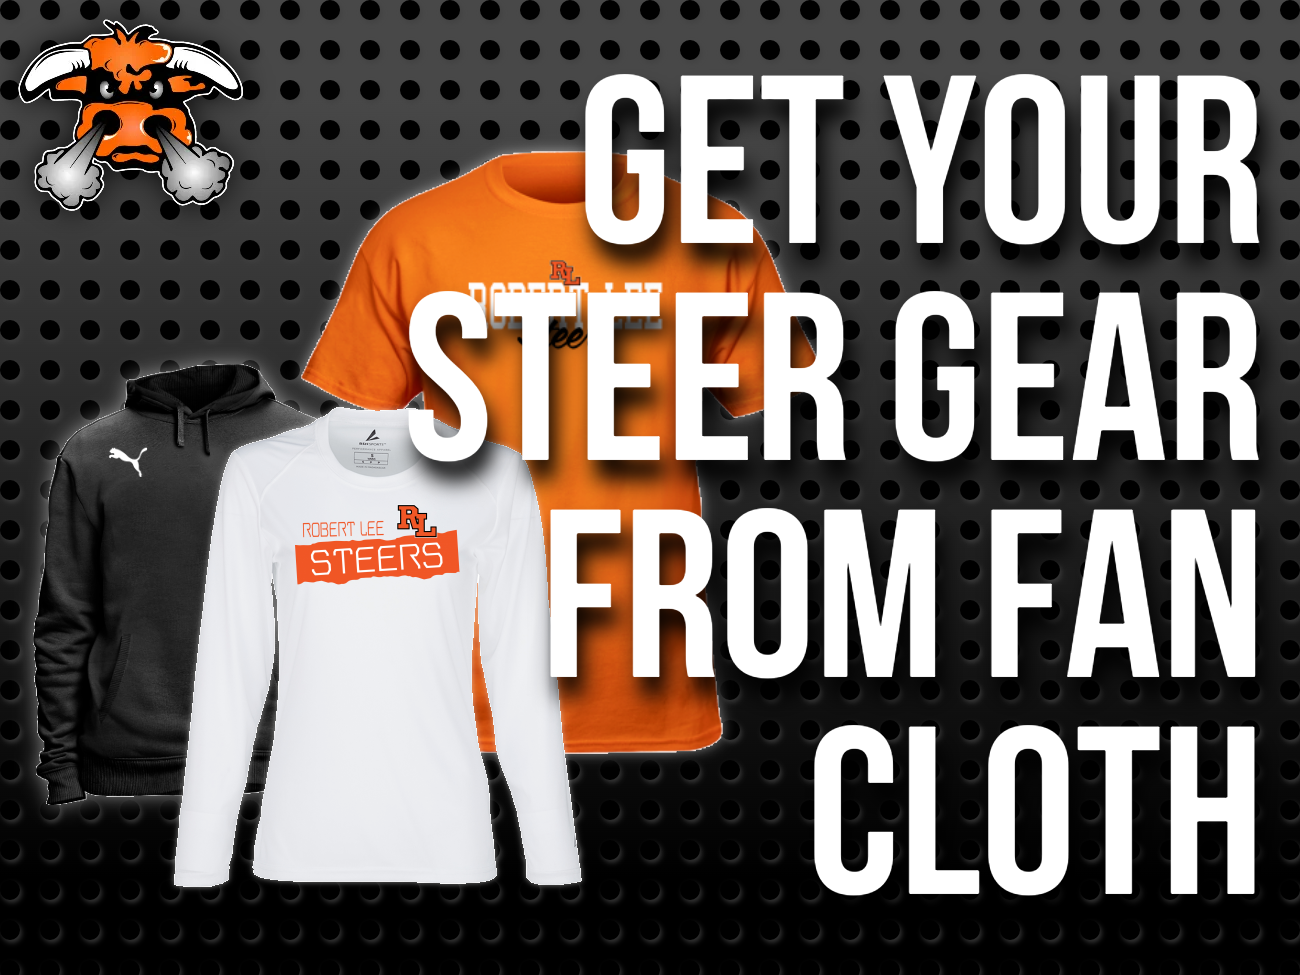 Get your Steer Gear from Fan Cloth